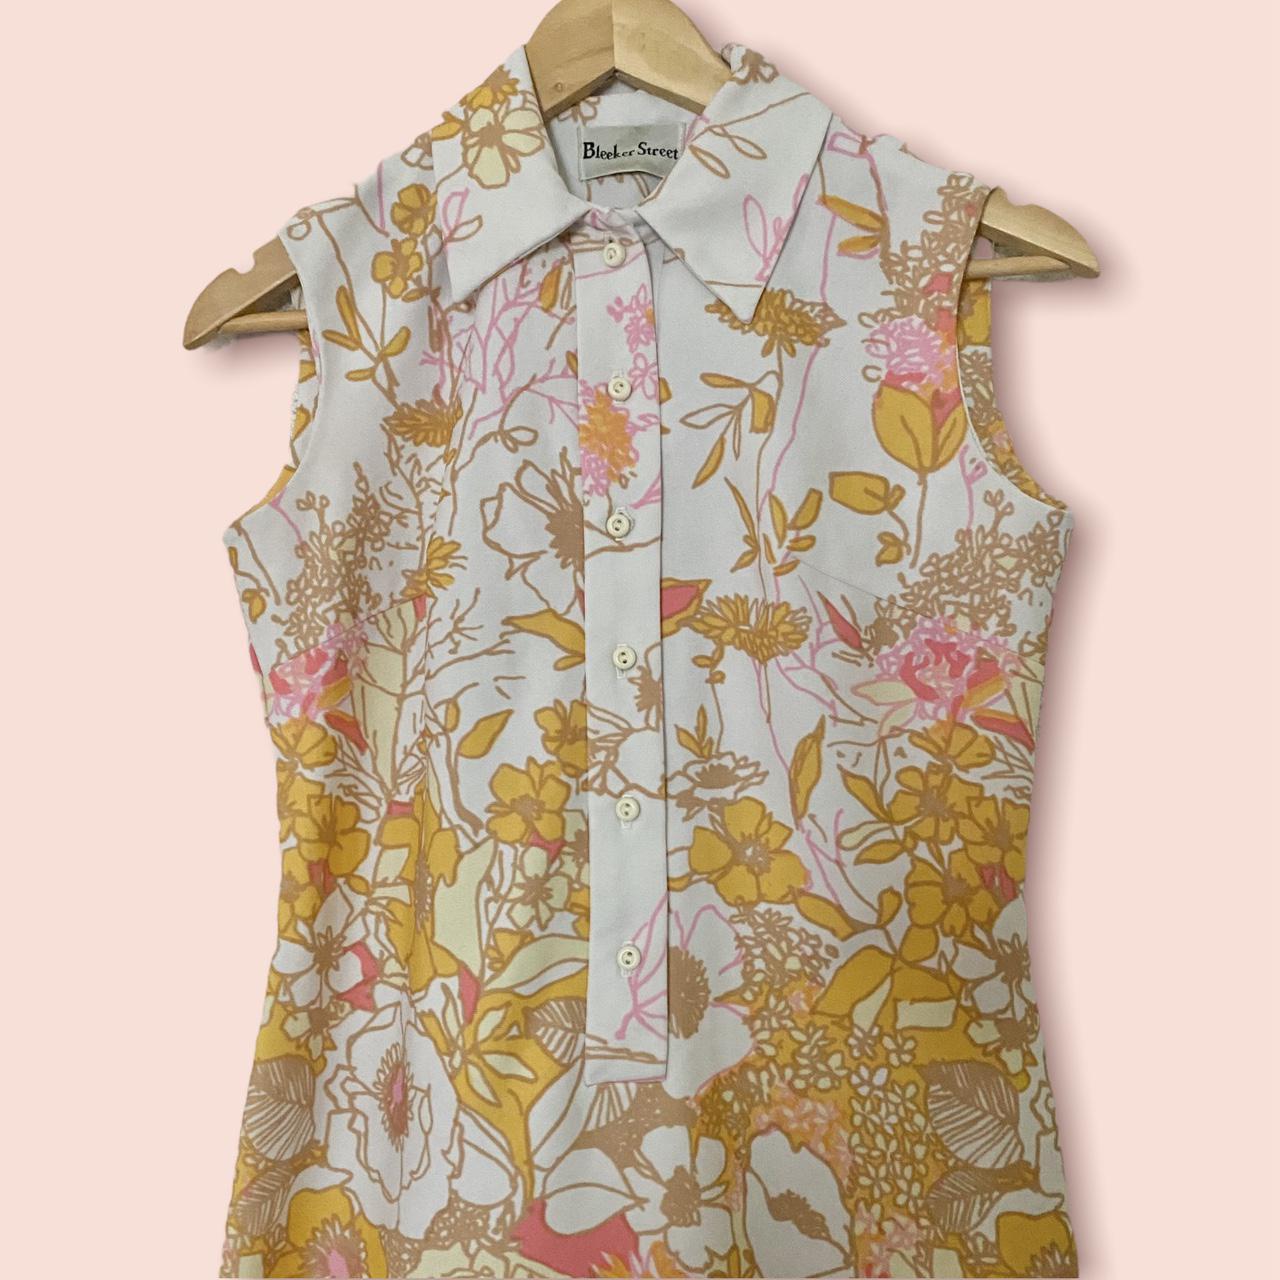 Product Image 2 - Bleeker Street 60’s Sleeveless Floral